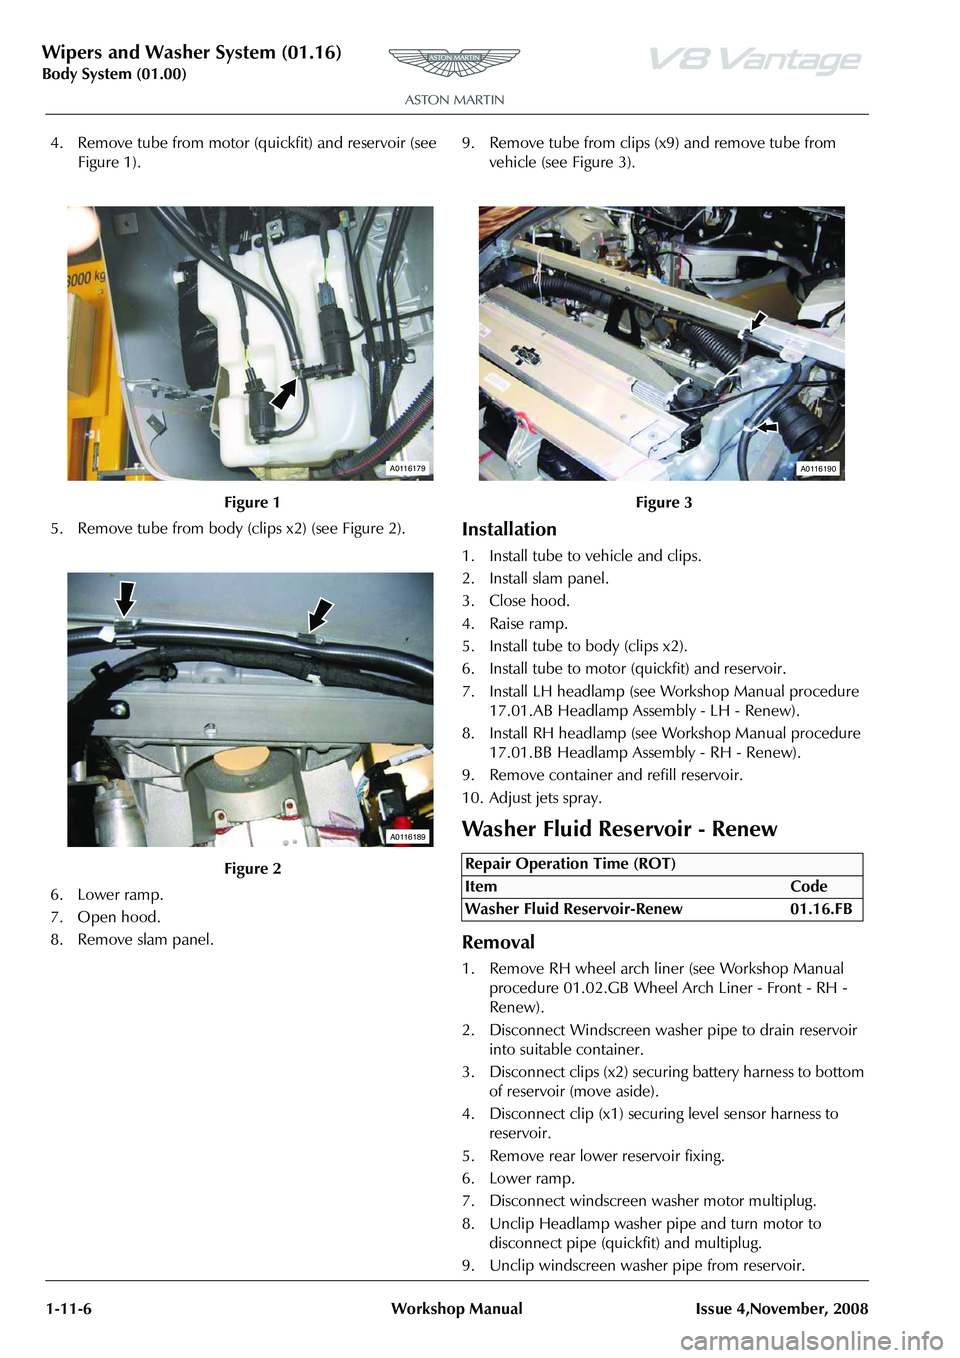 ASTON MARTIN V8 VANTAGE 2010  Workshop Manual Wipers and Washer System (01.16)
Body System (01.00)1-11-6 Workshop Manual Issue 4,November, 2008
4. Remove tube from motor (quickfit) and reservoir (see  Figure 1).
5. Remove tube from body (c lips x